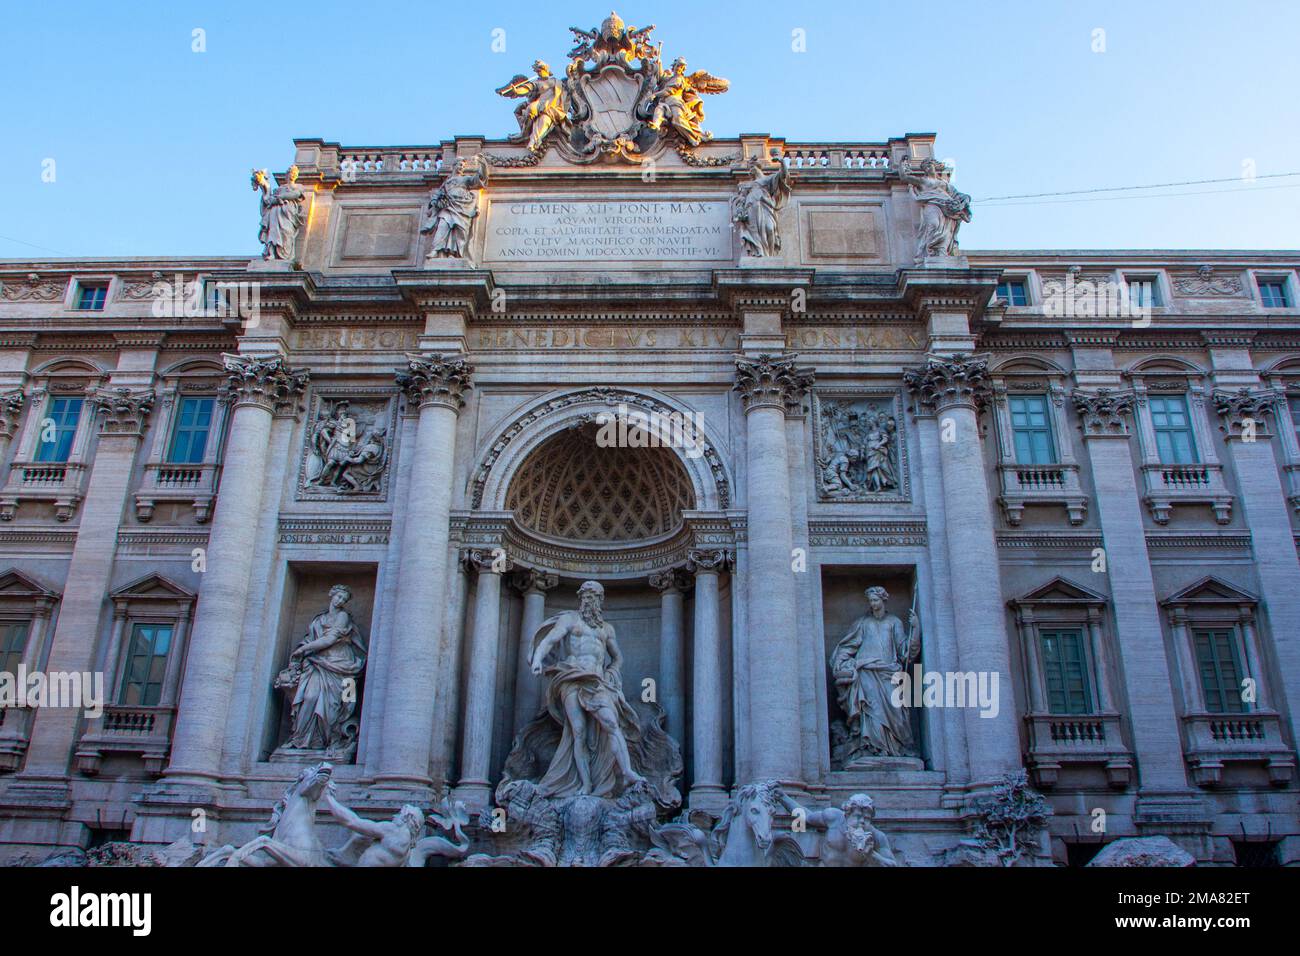 The Trevi Fountain. Construction began during the time of Ancient Rome and was completed in 1762 by a design of Nicola Salvi. Rome Italy Stock Photo